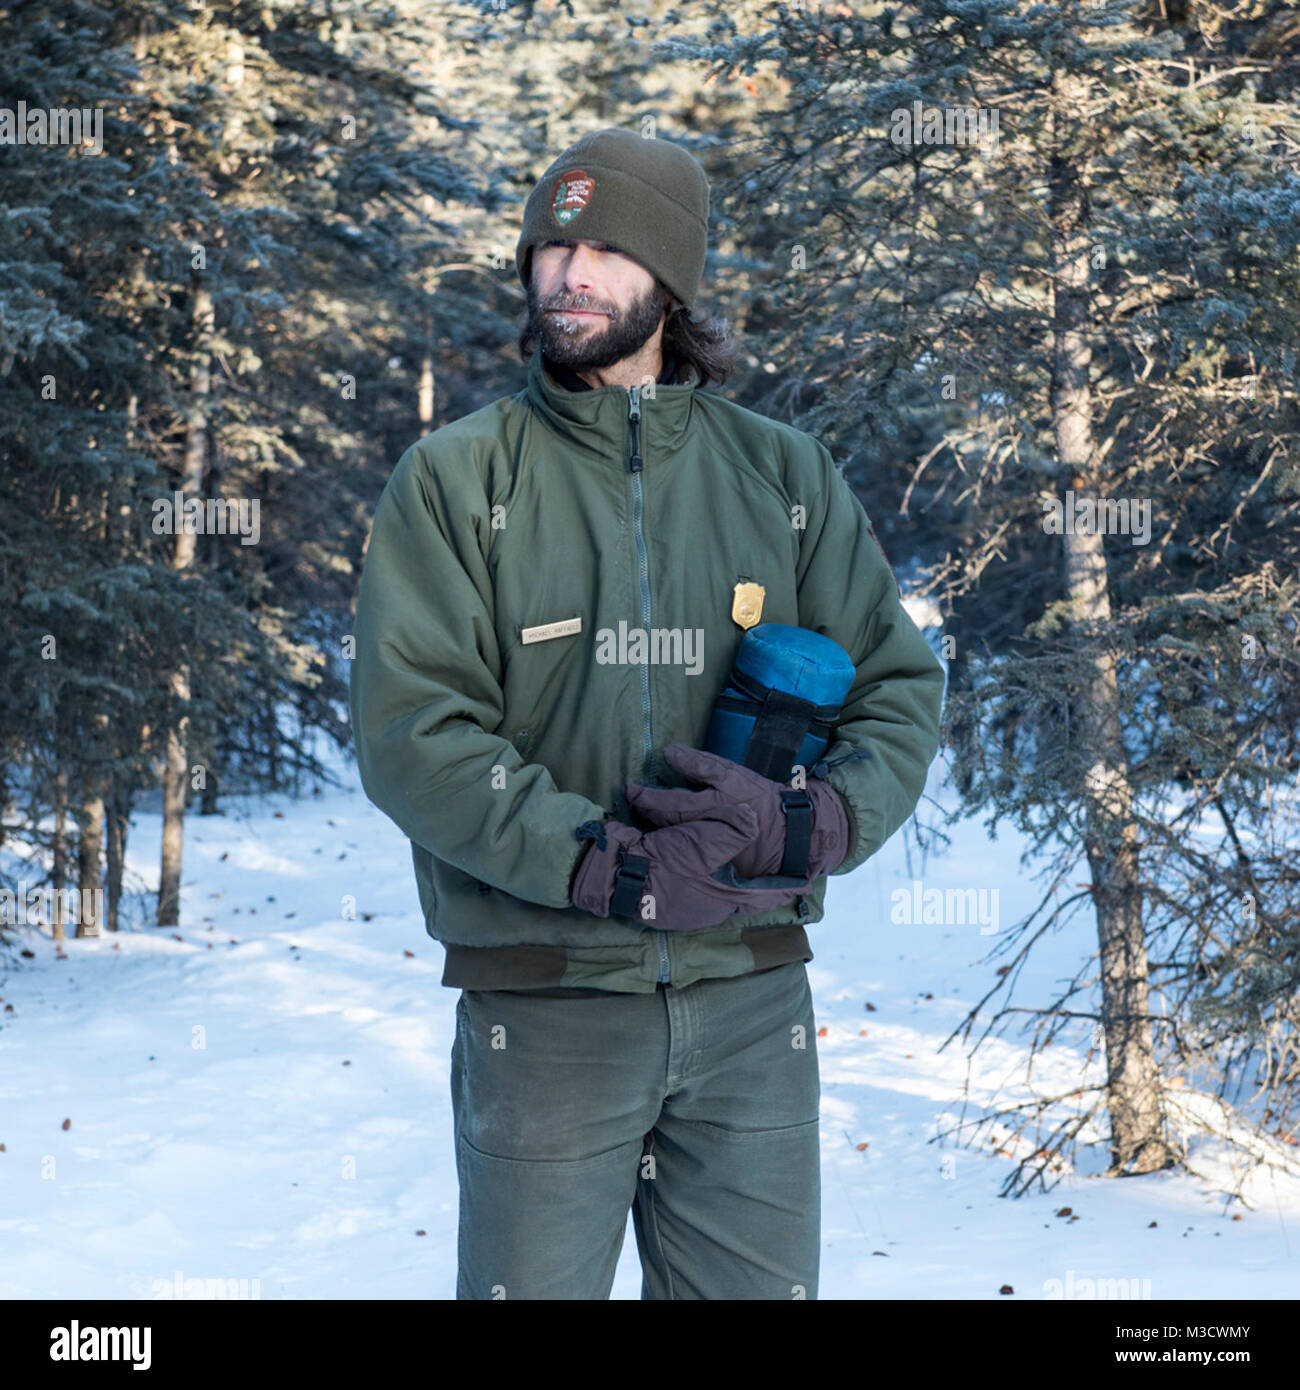 Denali Ranger Michael stands pensively in a winter setting. Stock Photo